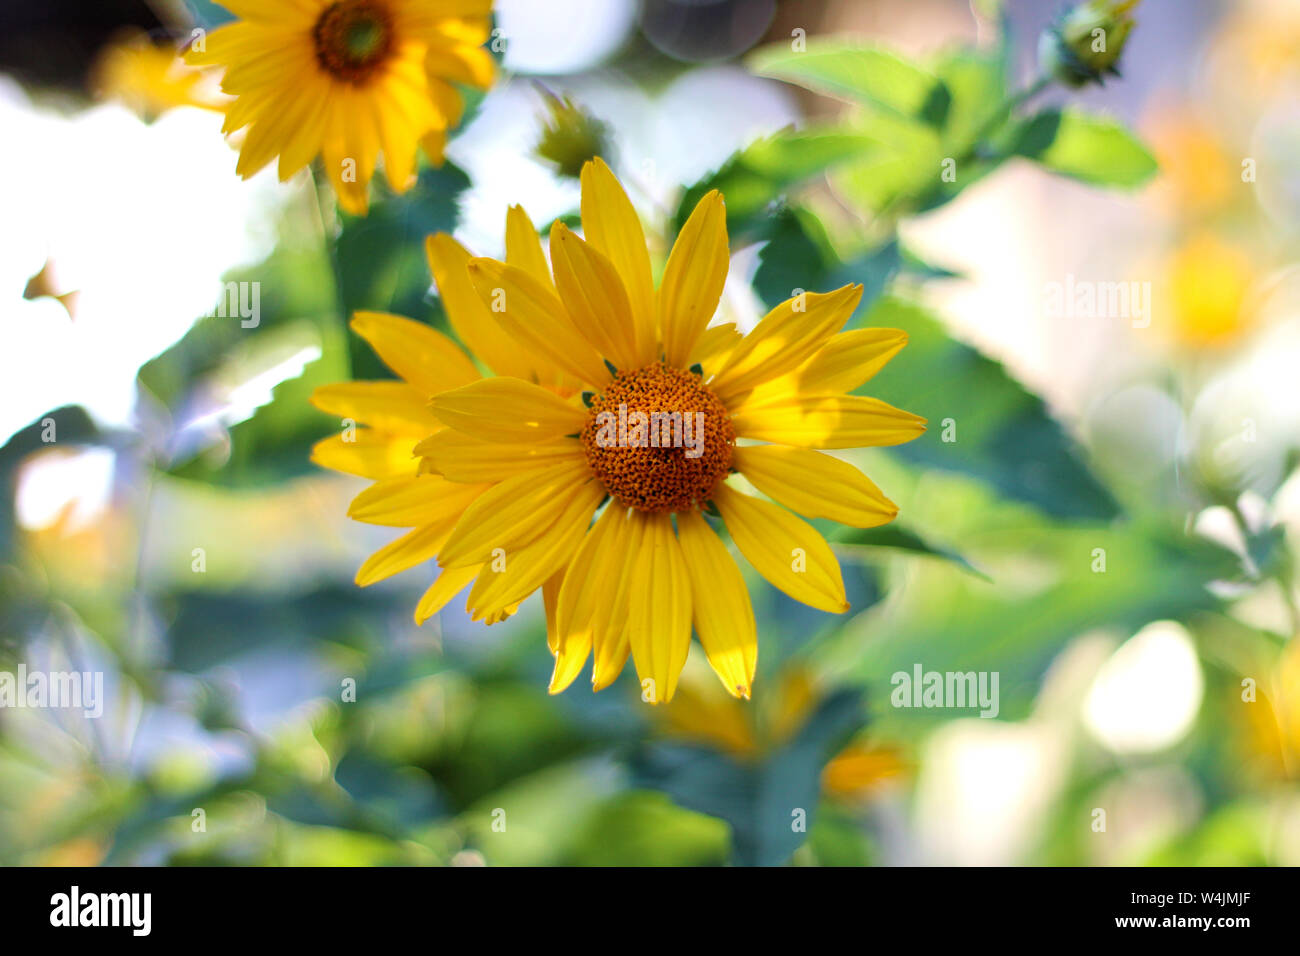 orange-yellow flowers at sunset. Similar to daisy flowers on a blurred background with bokeh. Stock Photo